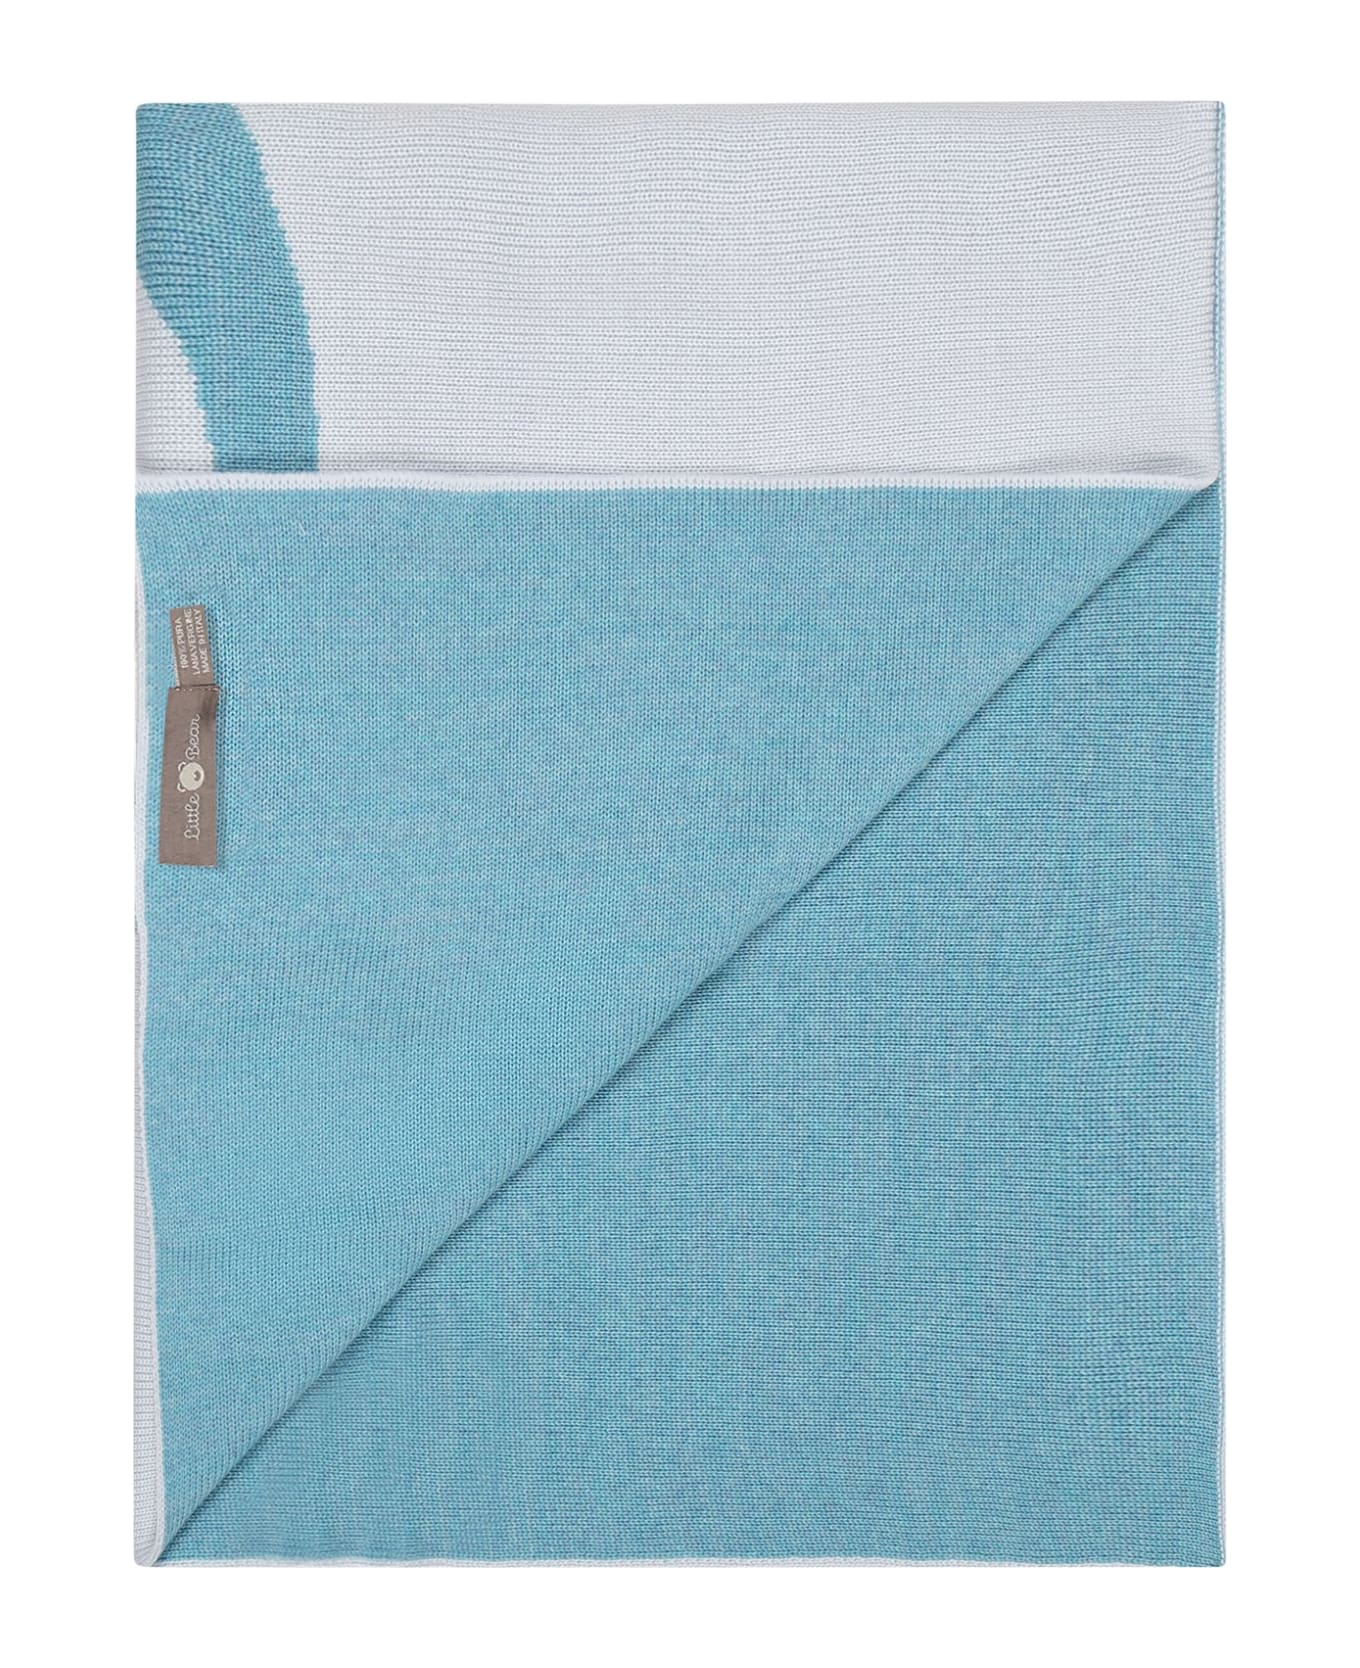 Little Bear Light Blue Blanket For Baby Boy With Embroidered Light Blue Bear - Multicolor